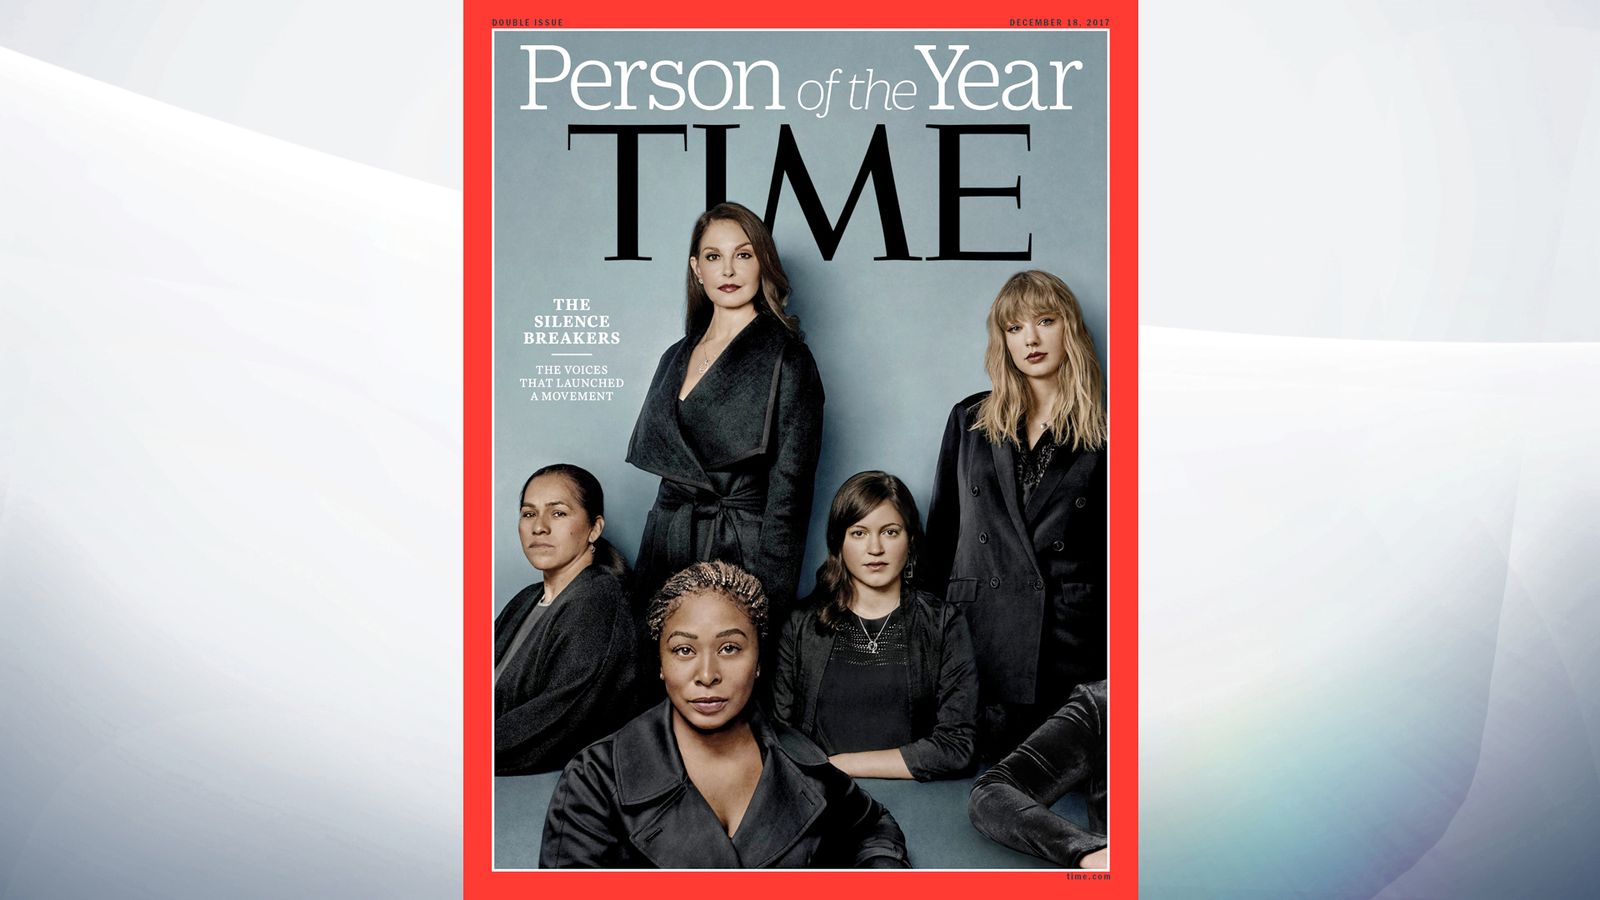 MeToo Time magazine's Person of the Year prize goes to 'Silence